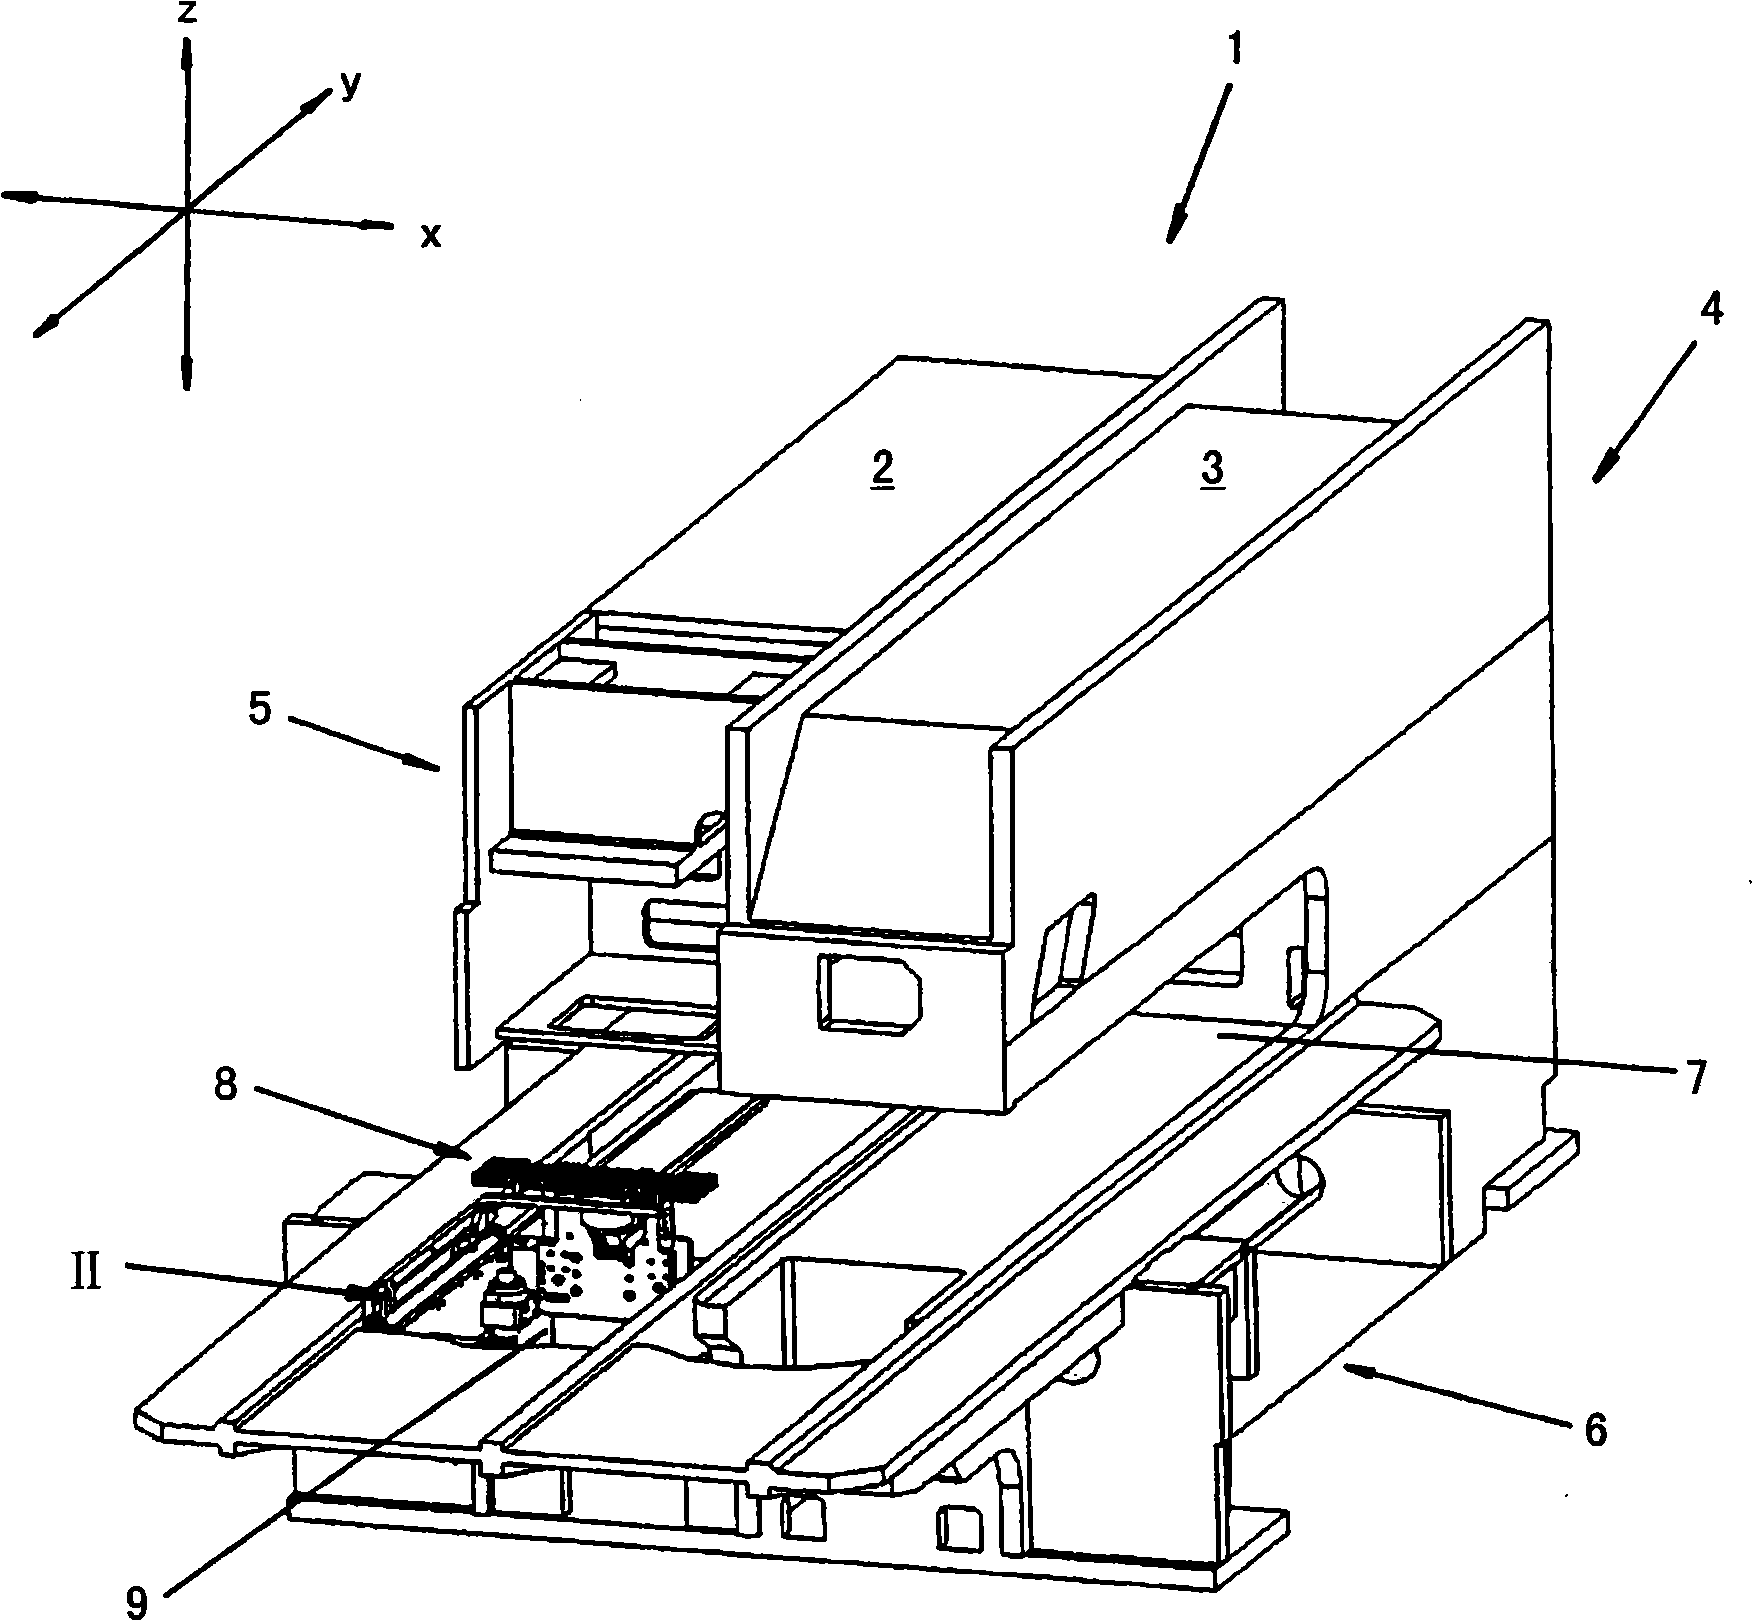 Laser processing machine for machining workpieces and machine method for machining workpieces using a laser beam